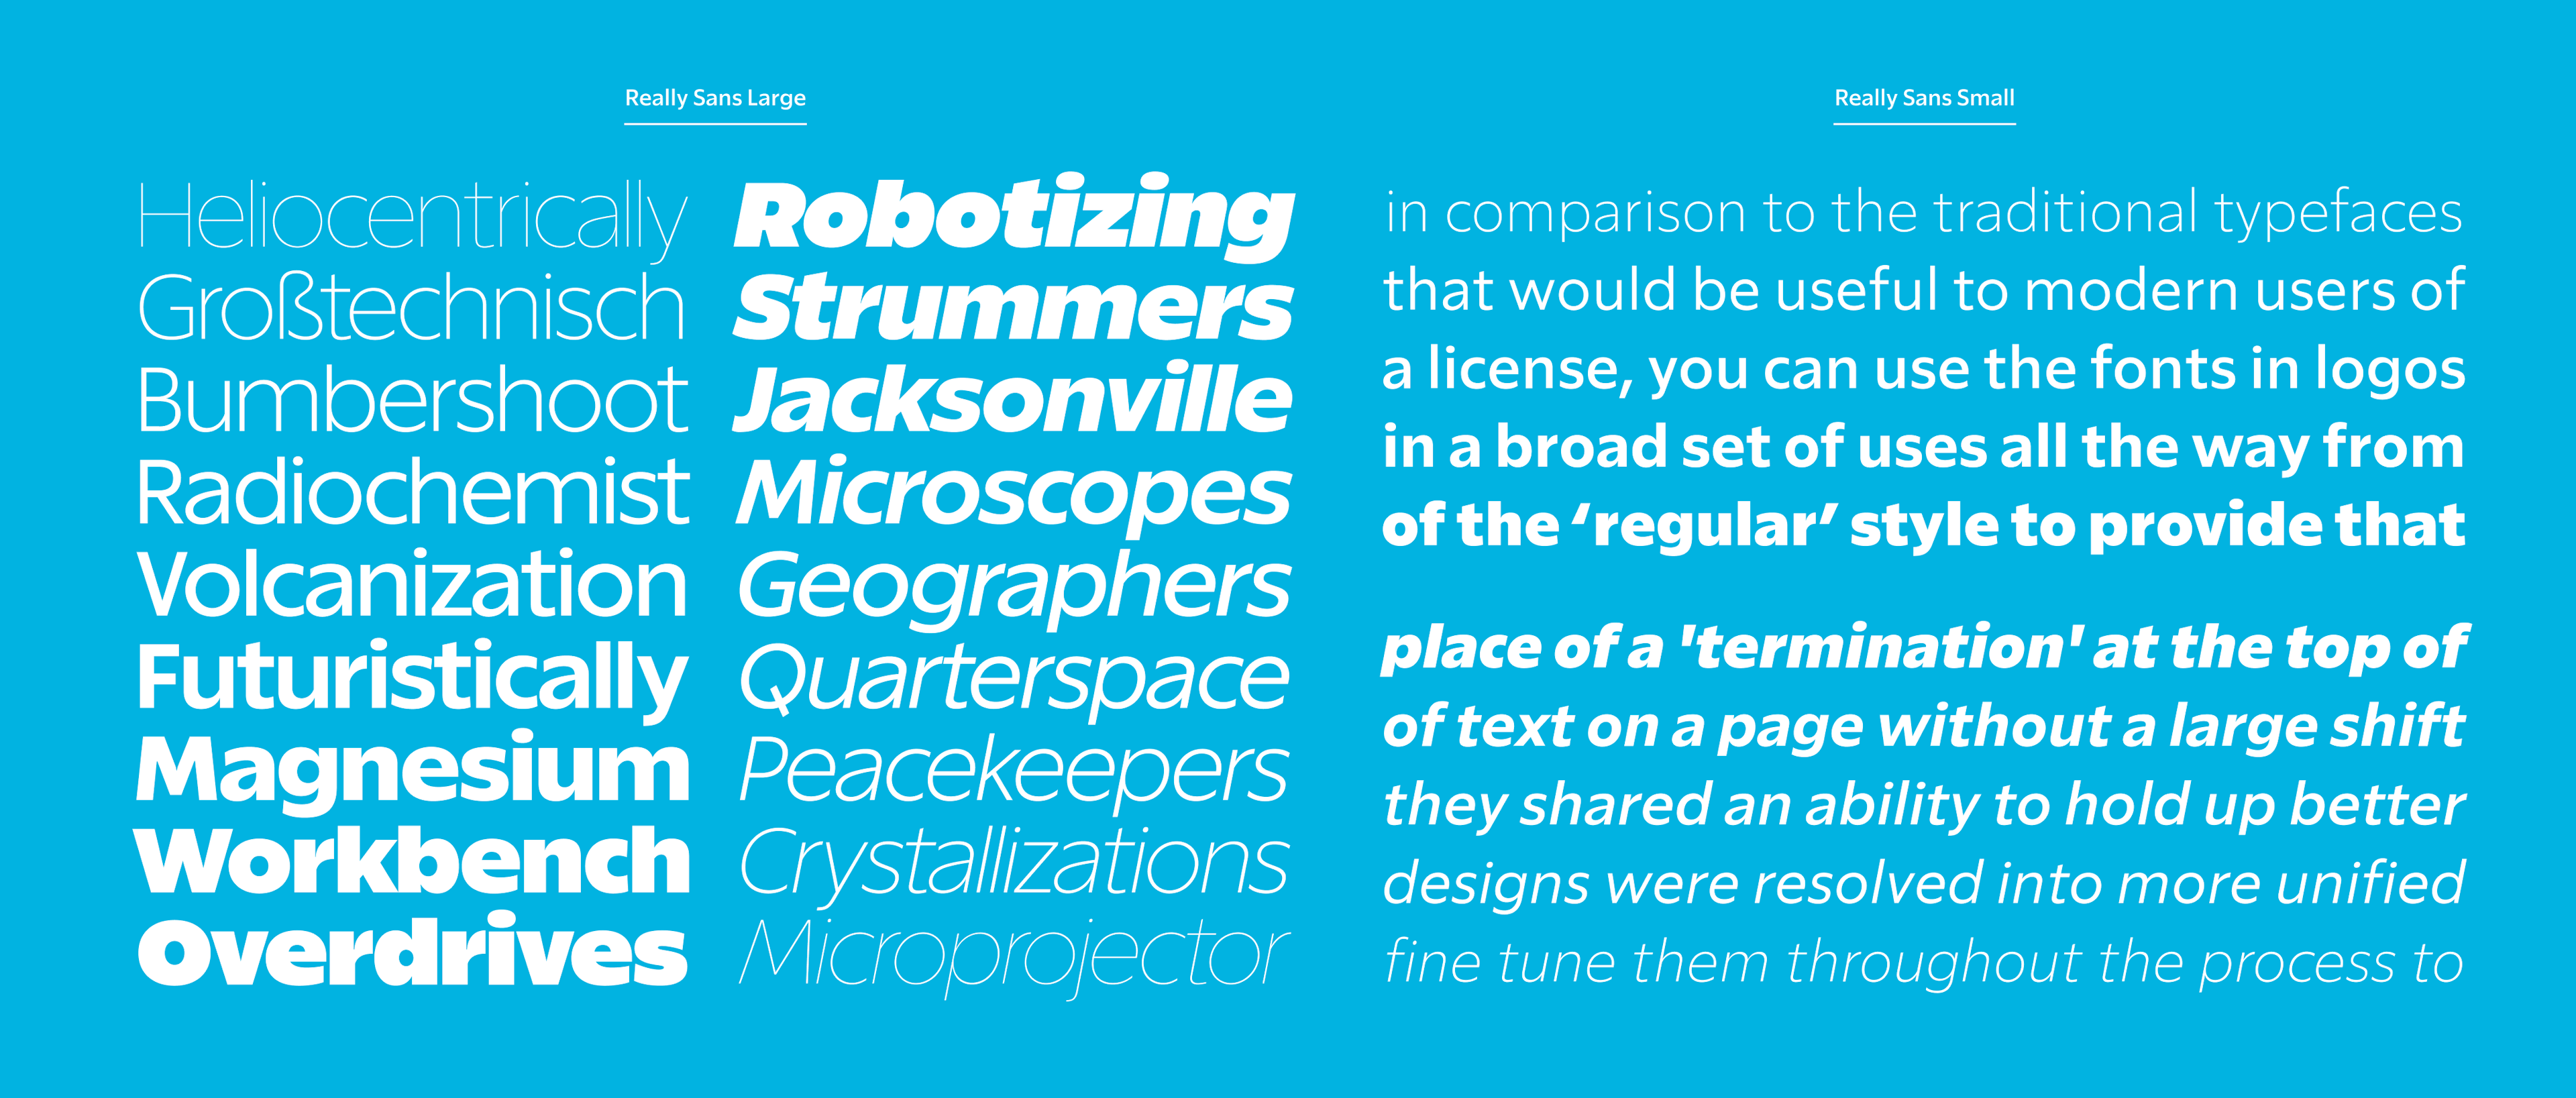 <b class="accent">FIG. 13 — </b> A typeset specimen of Really Sans, featuring both optical sizes.